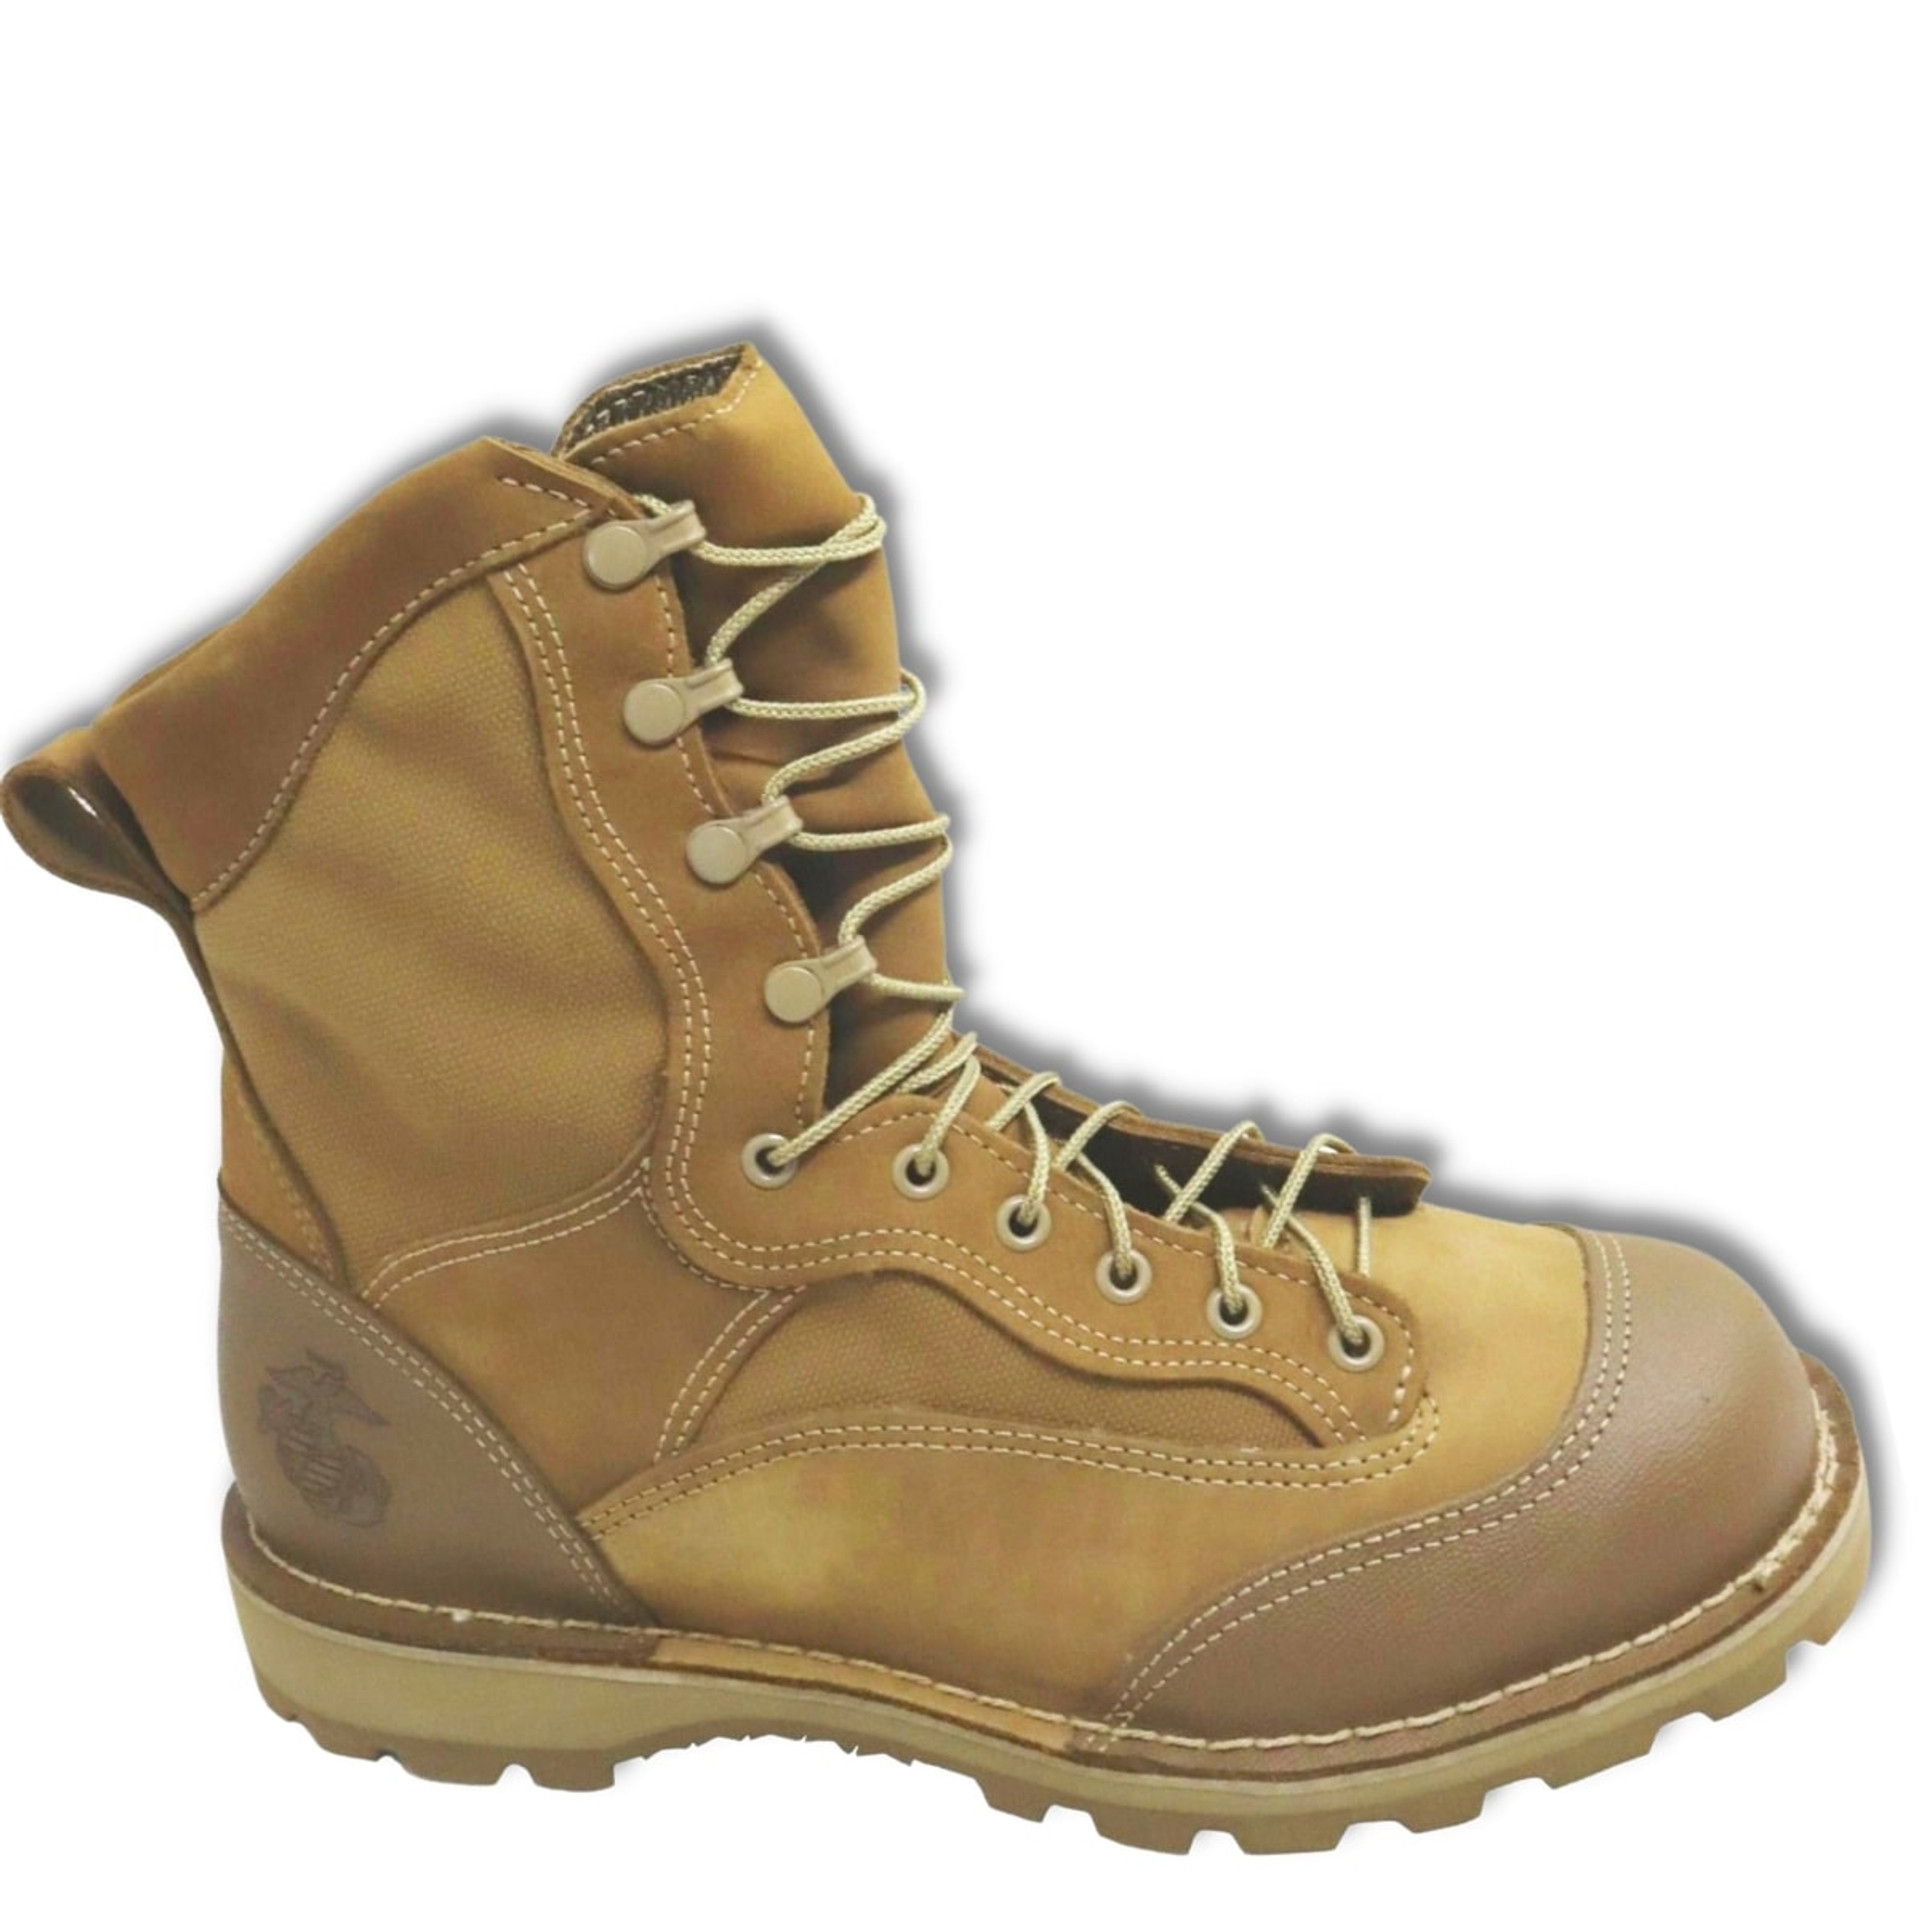 Danner USMC military Issue Cold Weather Gore-Tex Boot, MCWB